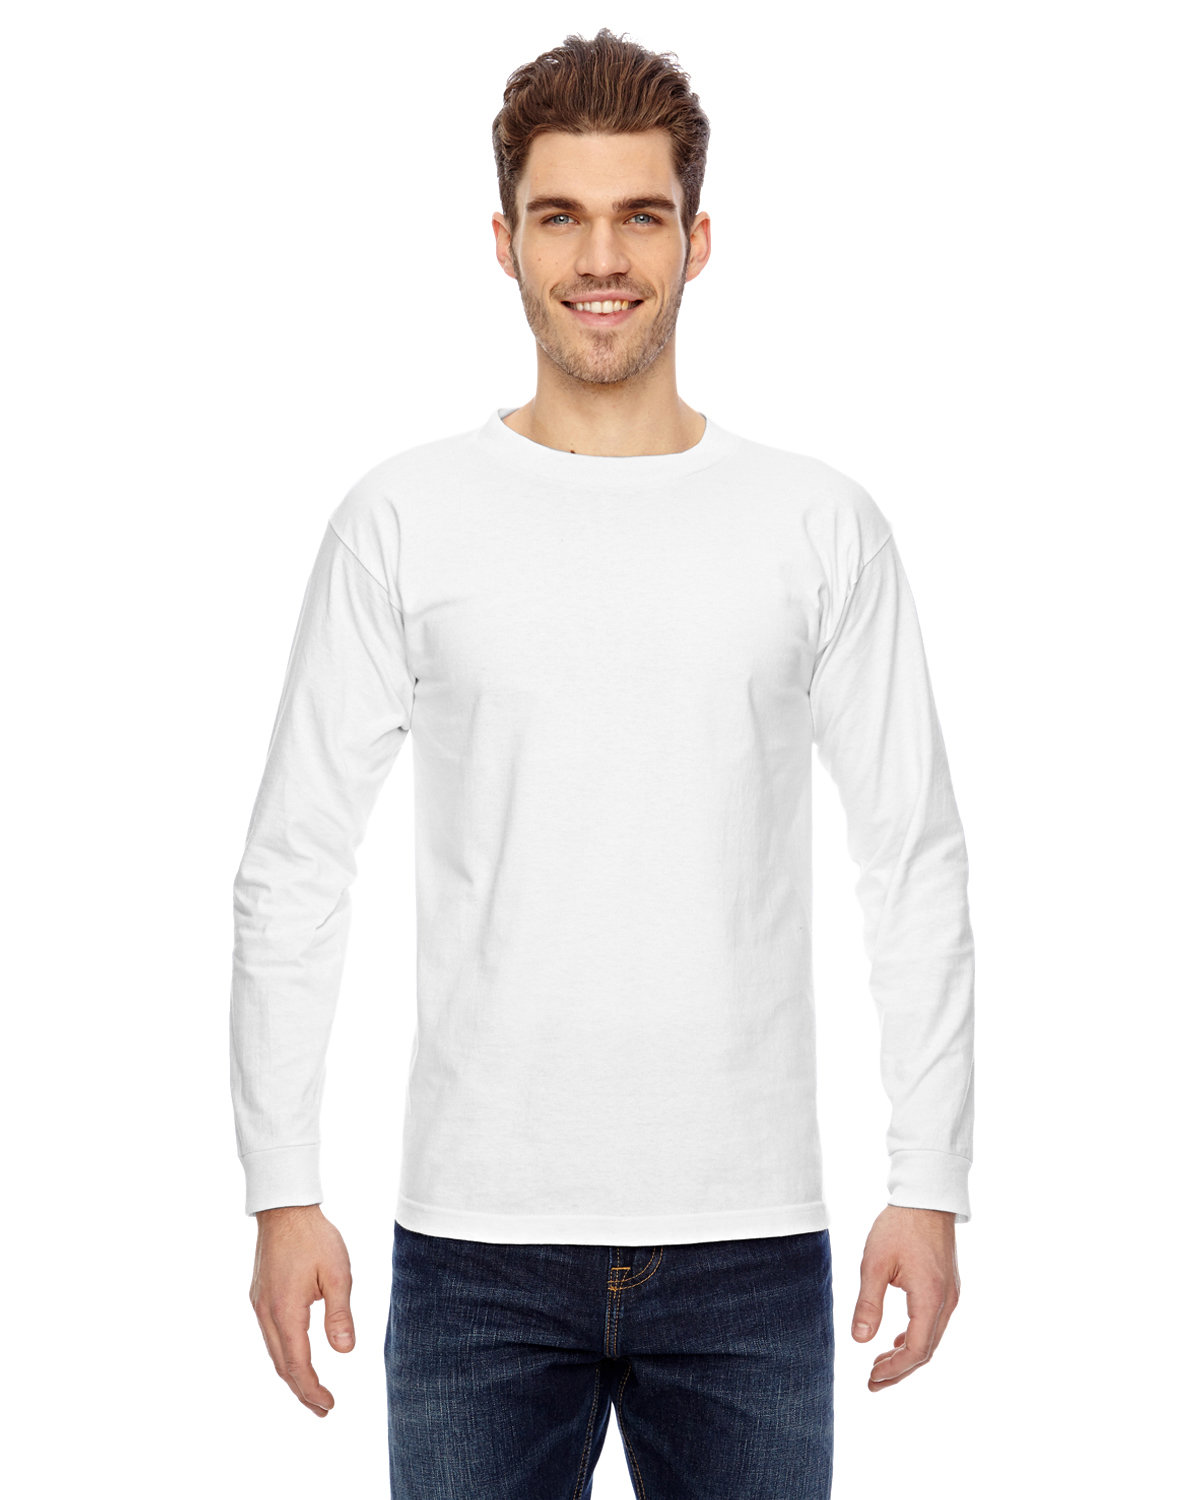 Front view of Adult 6.1 Oz., 100% Cotton Long Sleeve T-Shirt